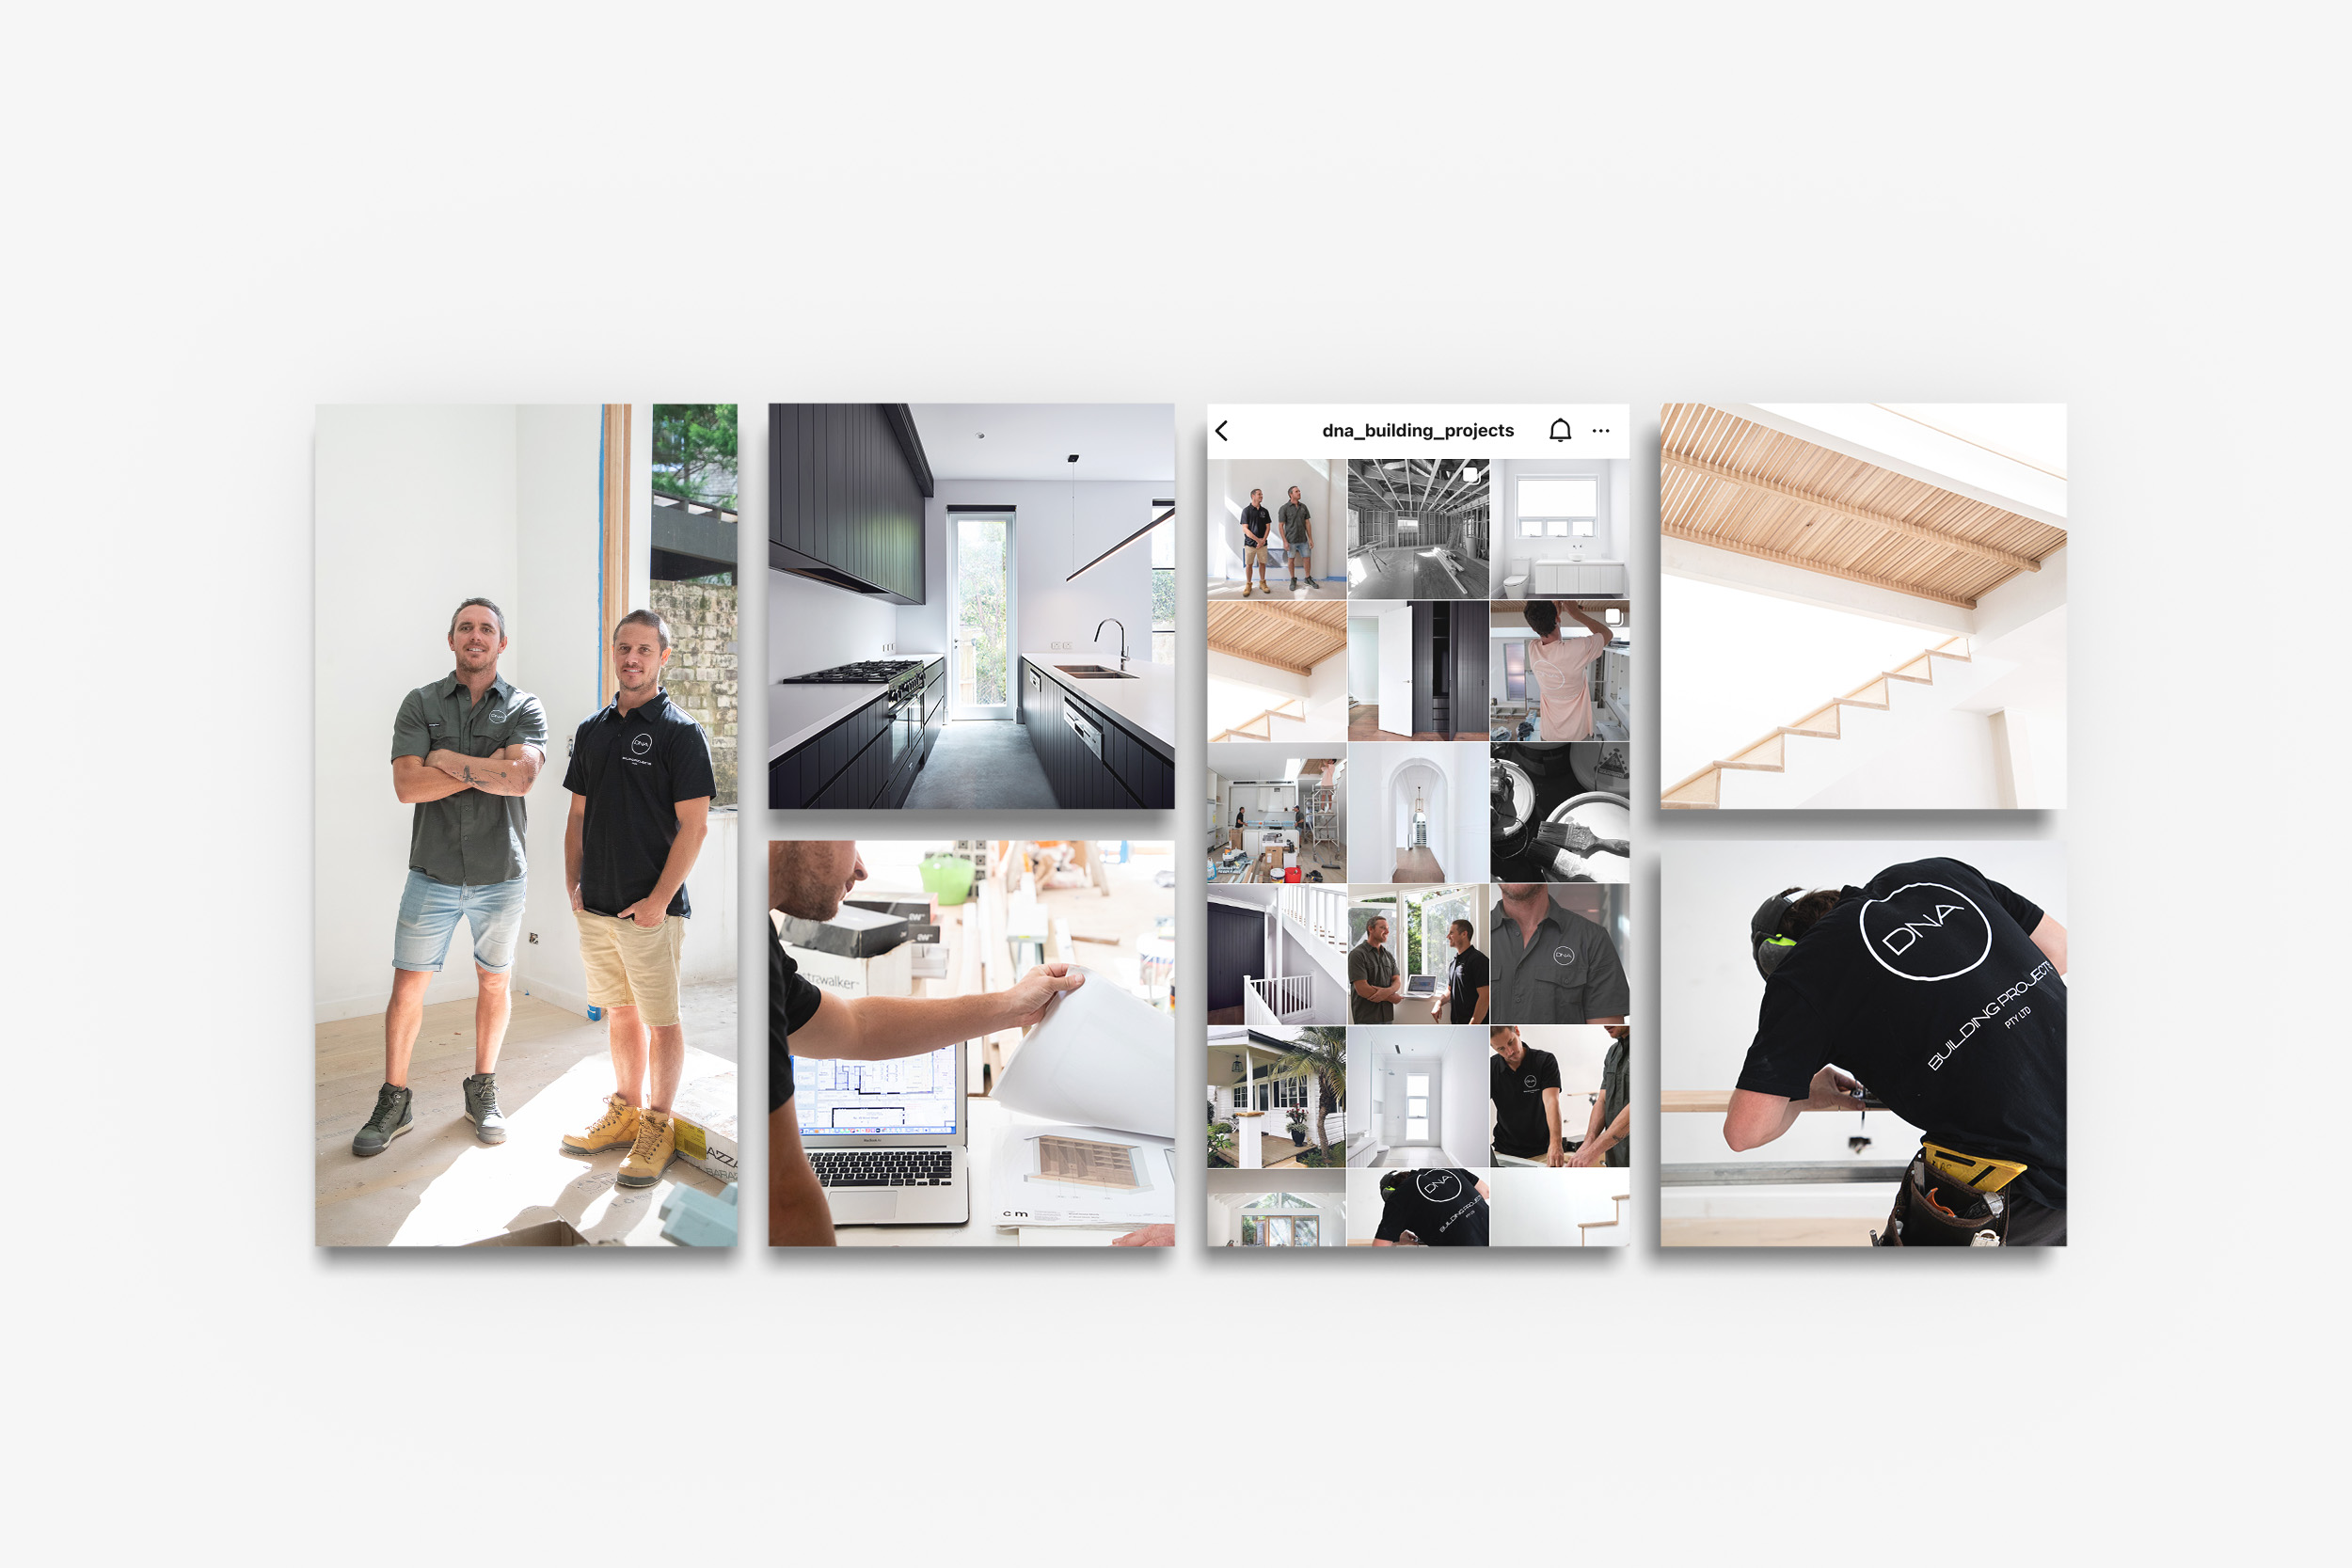 Instagram grid of renovation and home images to showcase the construction company, DNA